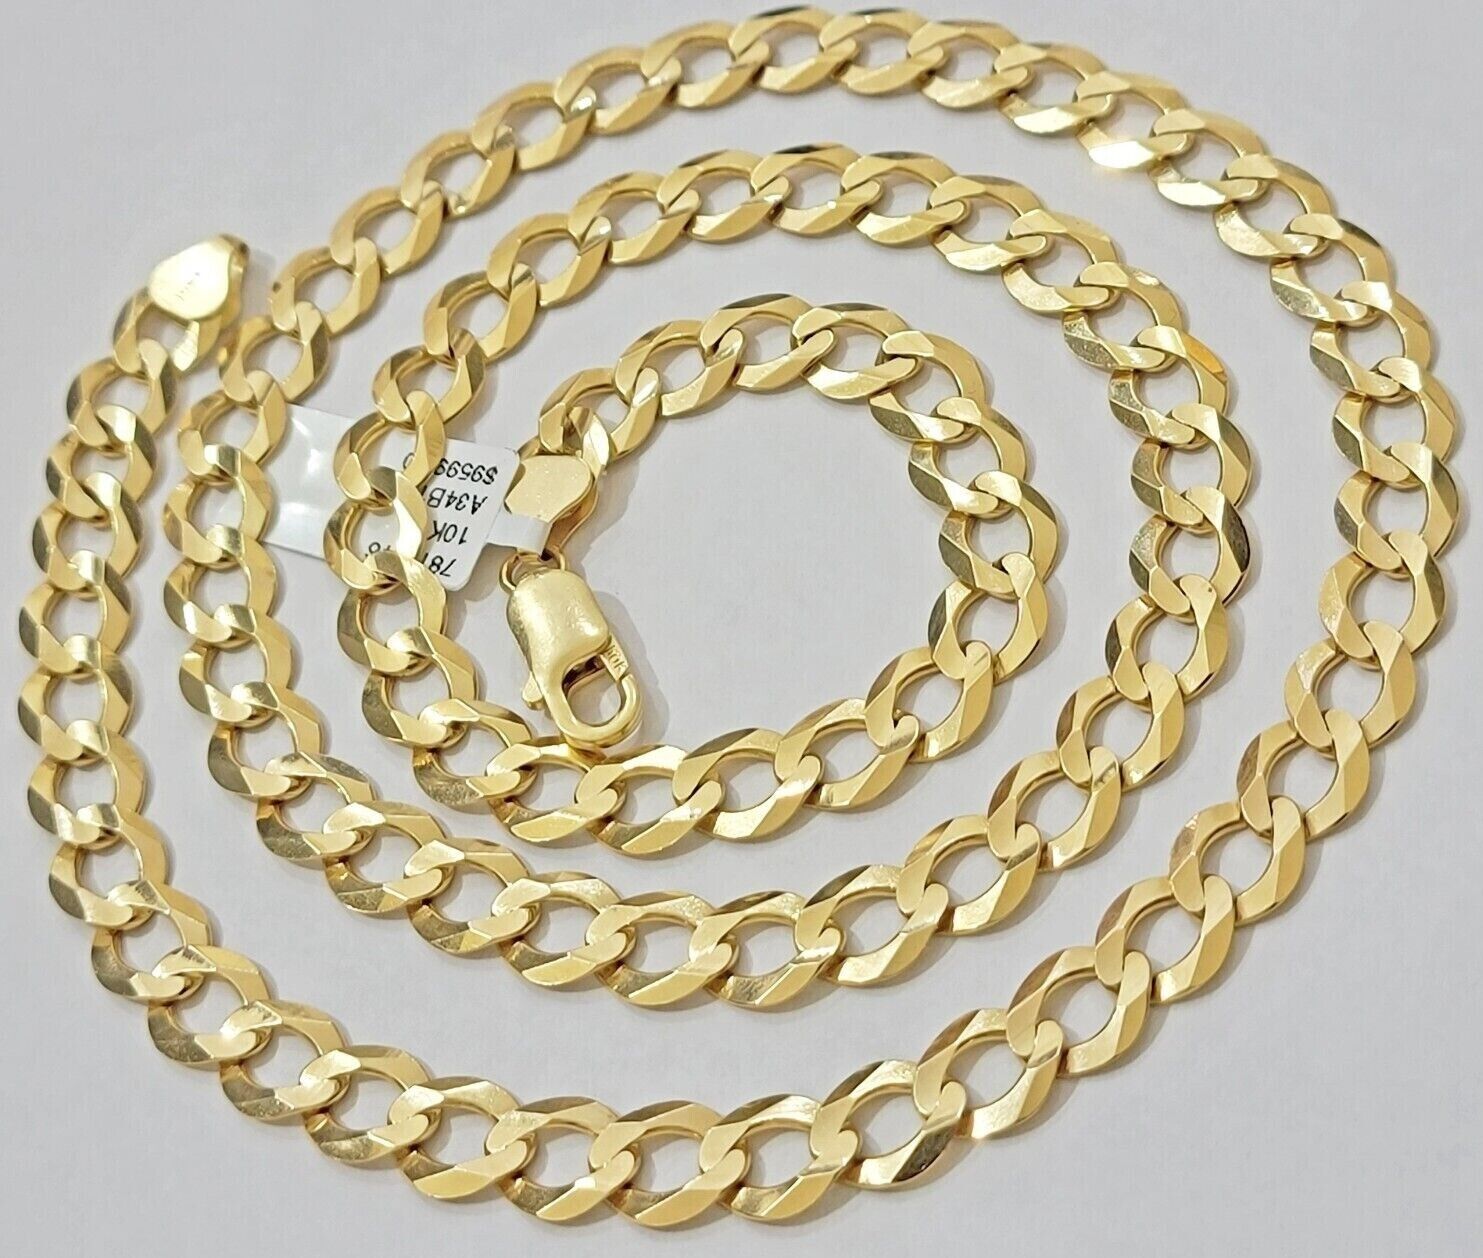 10K Solid Yellow Gold 9mm Cuban Curb Link Chain Necklace 24 Inch Mens, Real 10kt